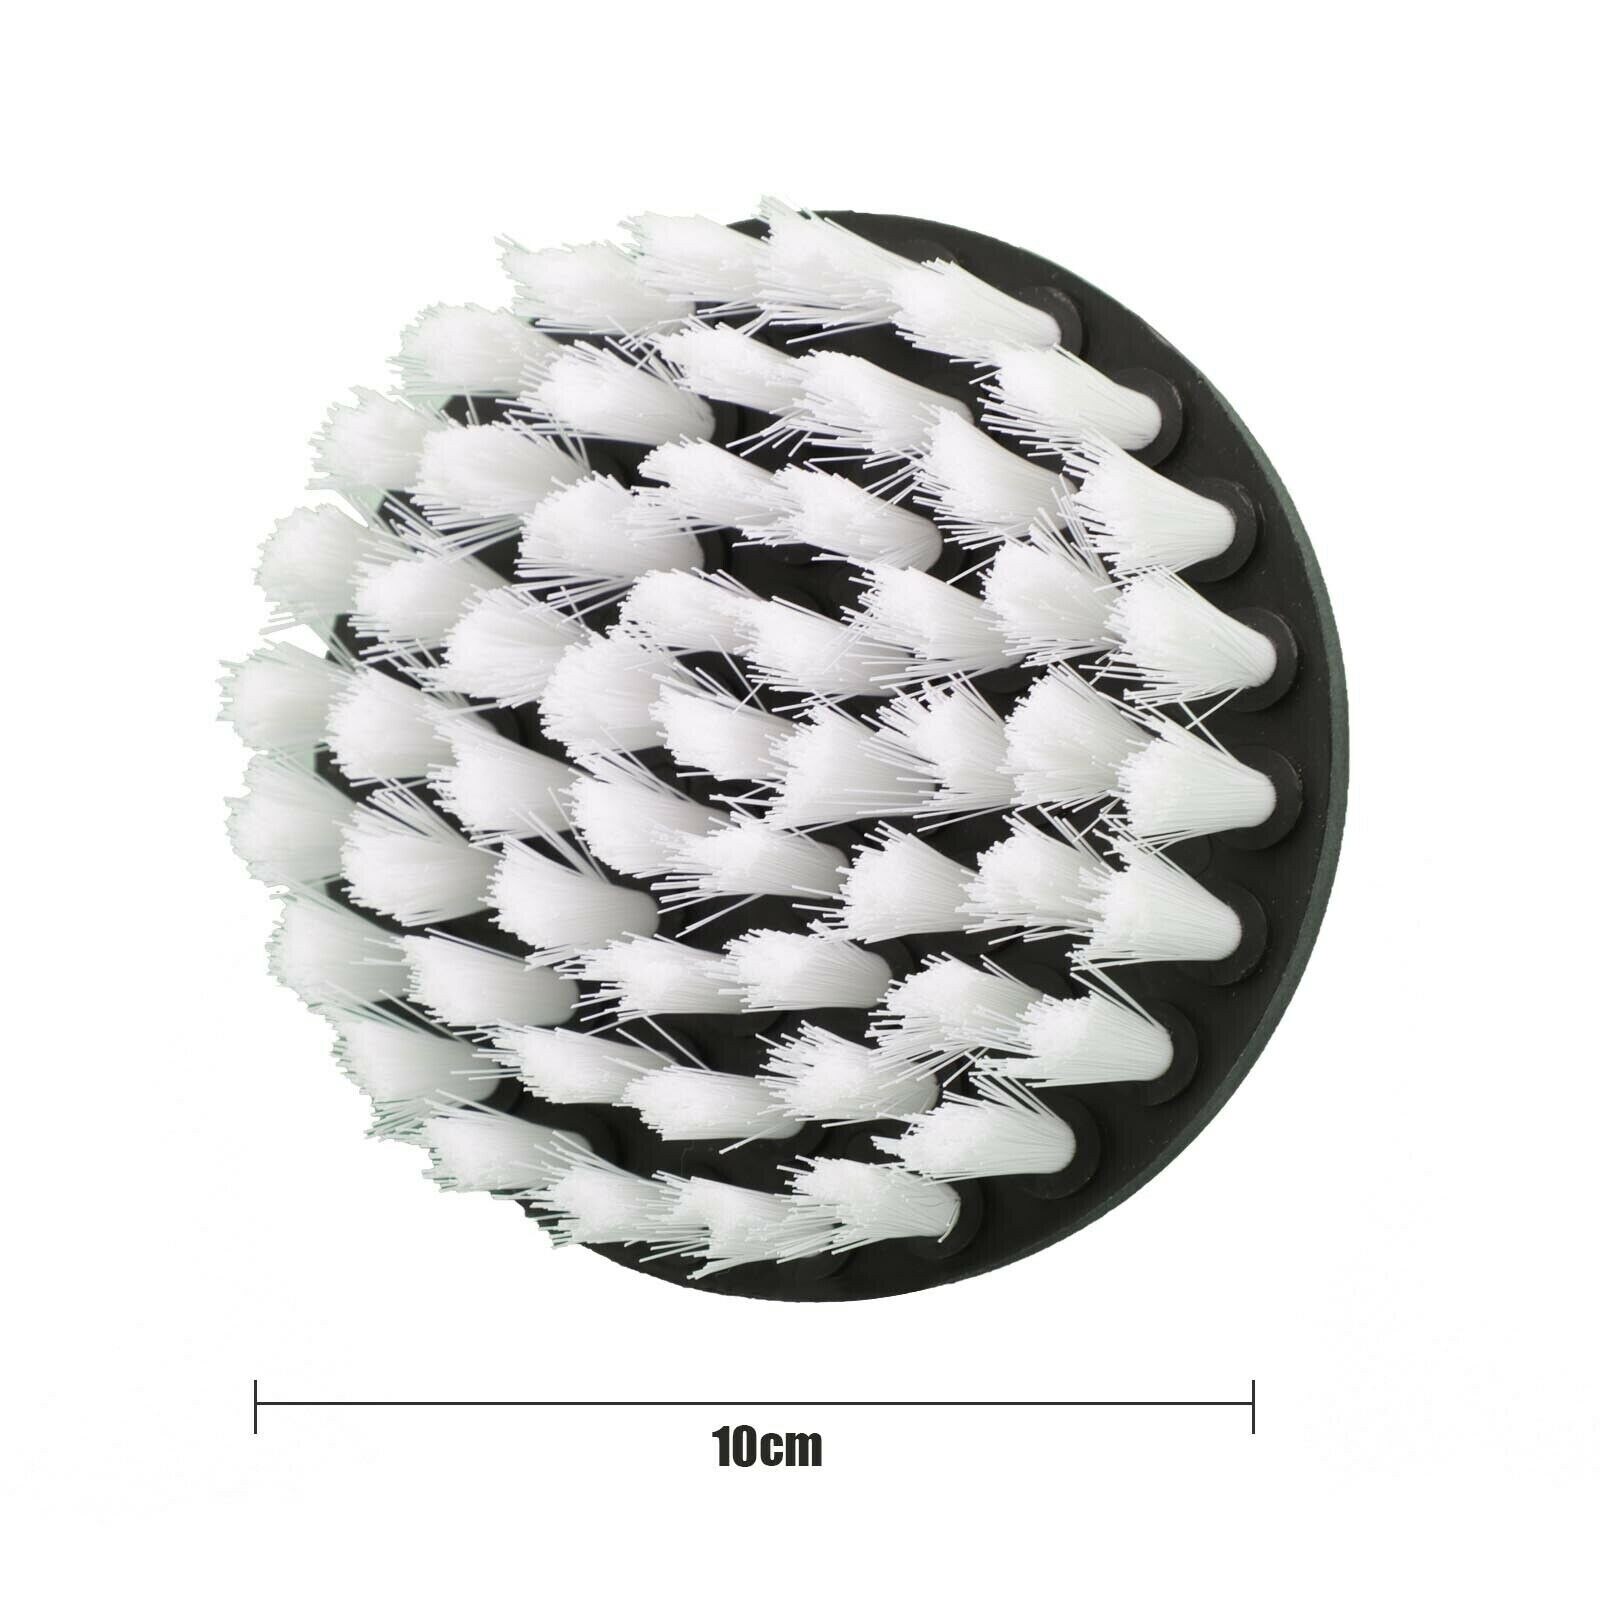 White Soft Brush Attachment For Cleaning Carpet Leather Carpet Glass Car Tires Electric Round Cleaning Brush